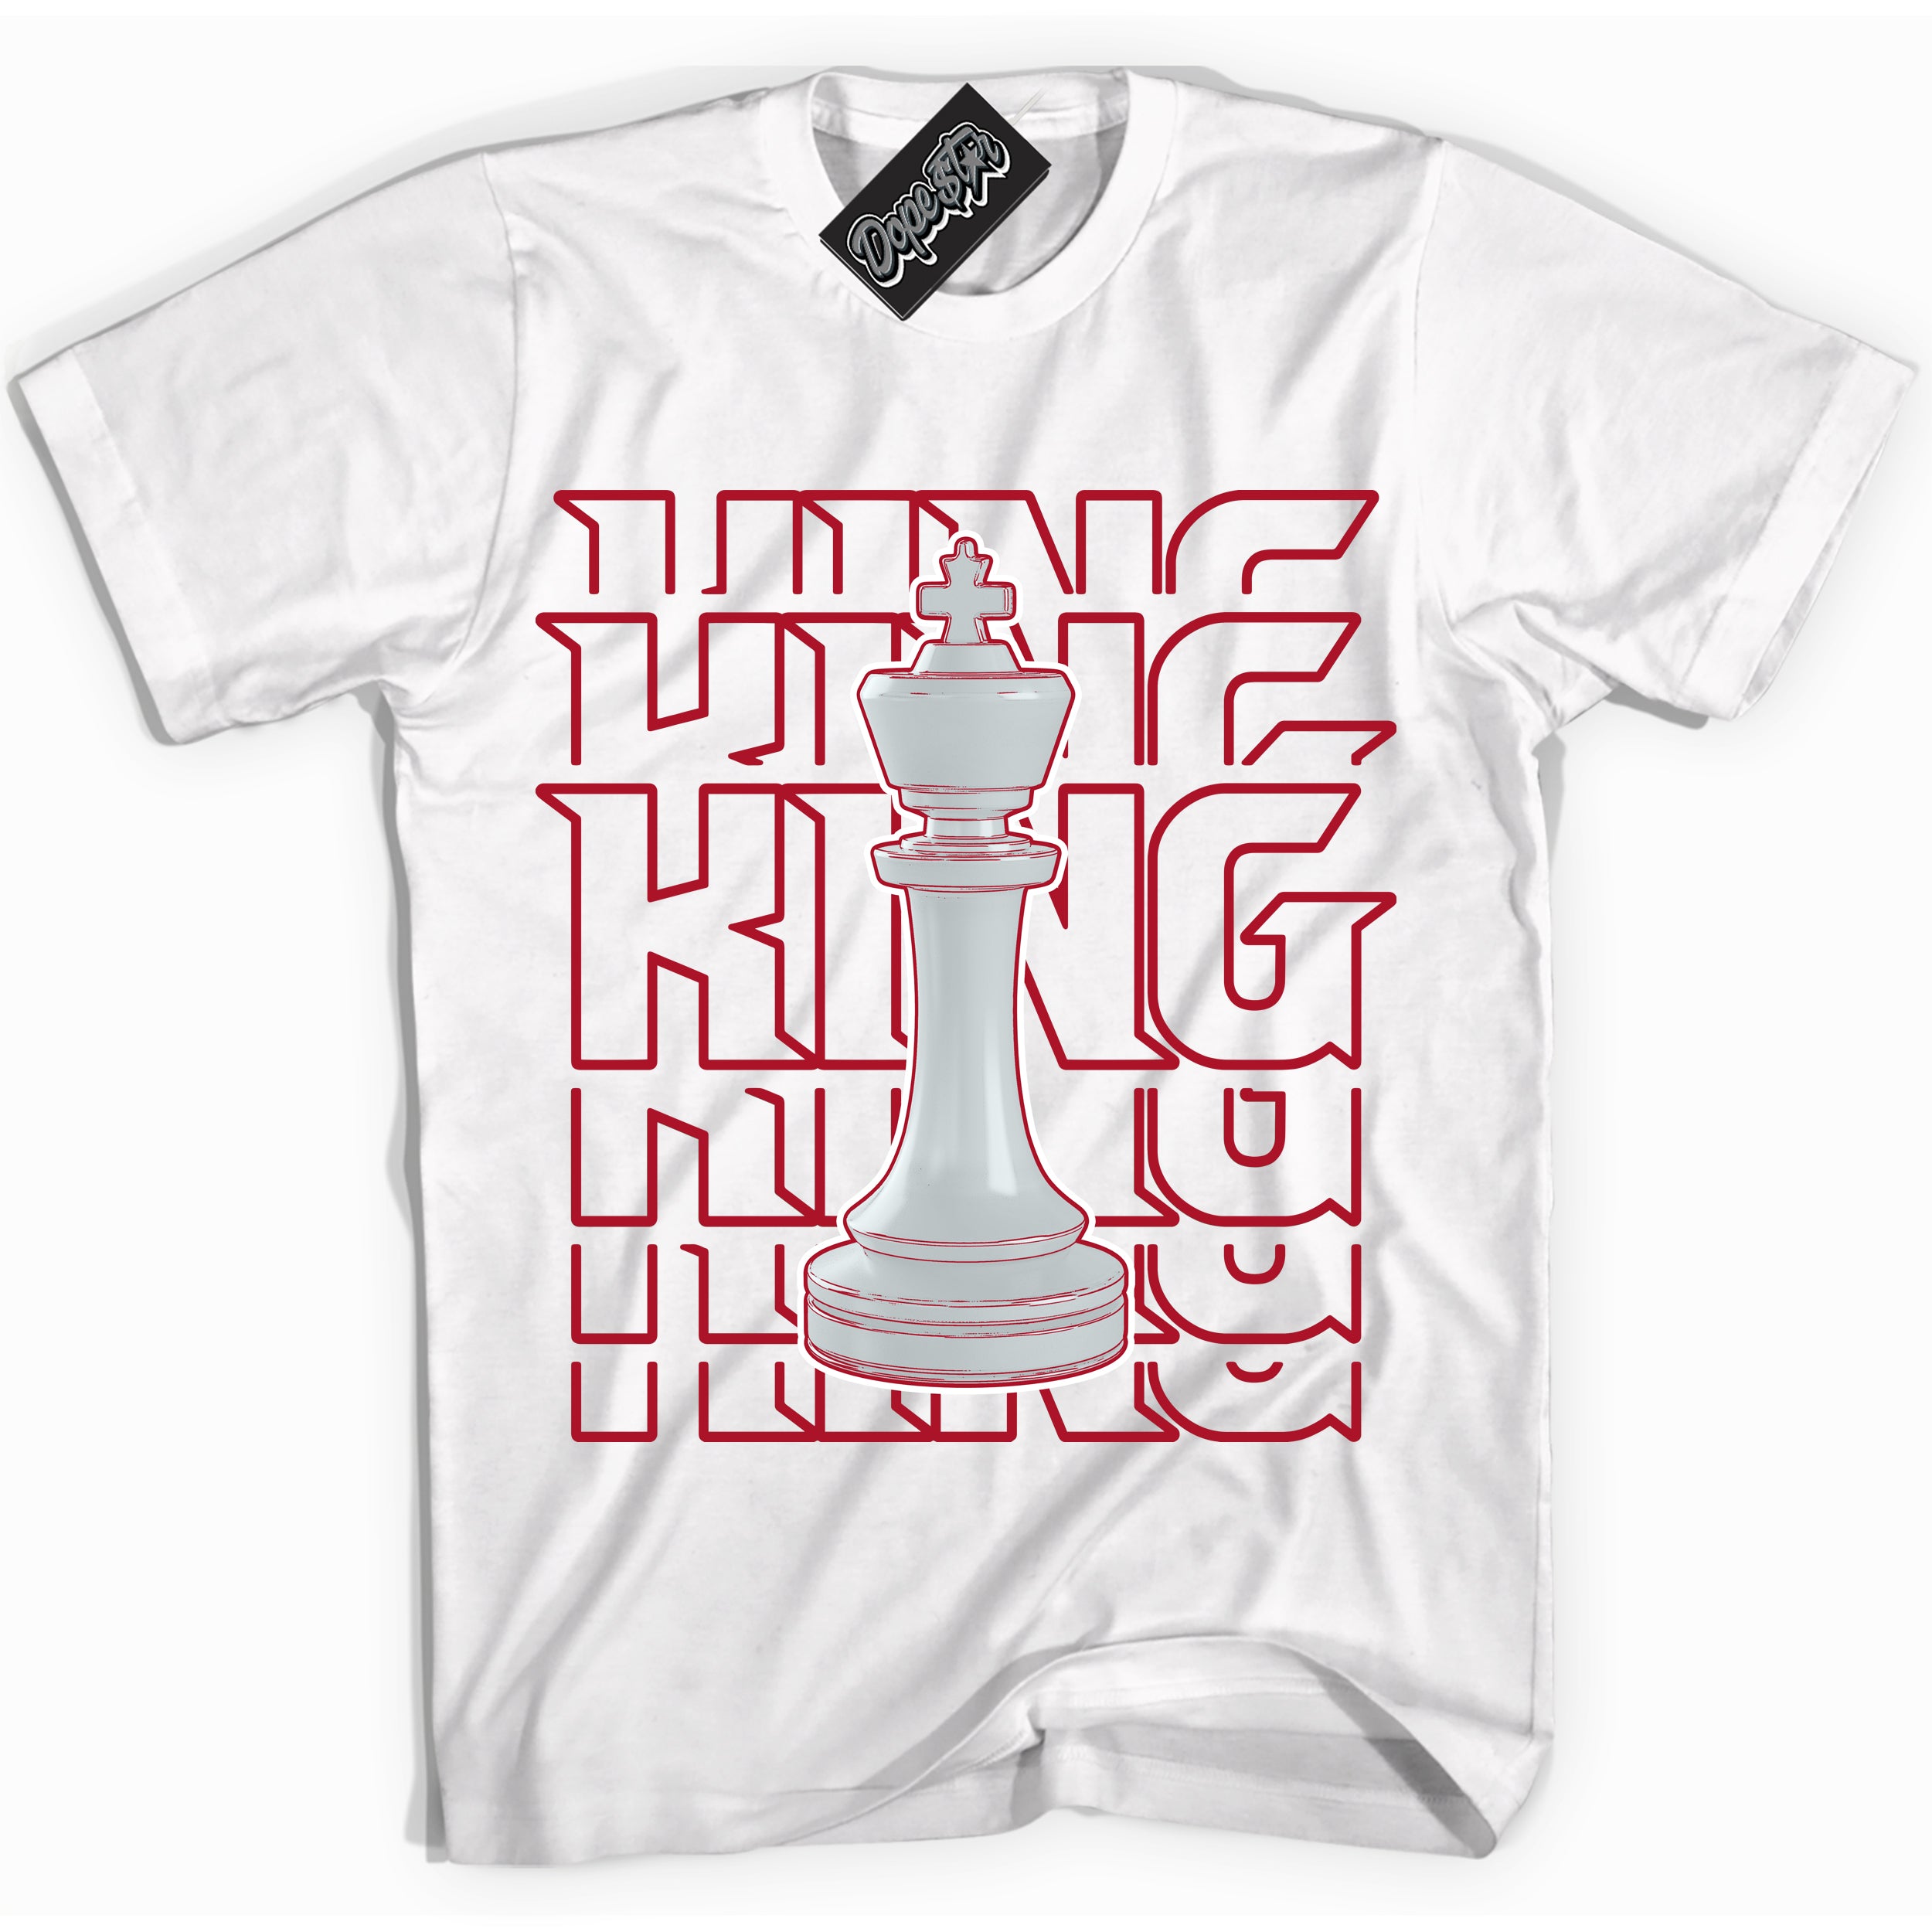 Cool White Shirt with “ King Chess” design that perfectly matches Reverse Ultraman Sneakers.